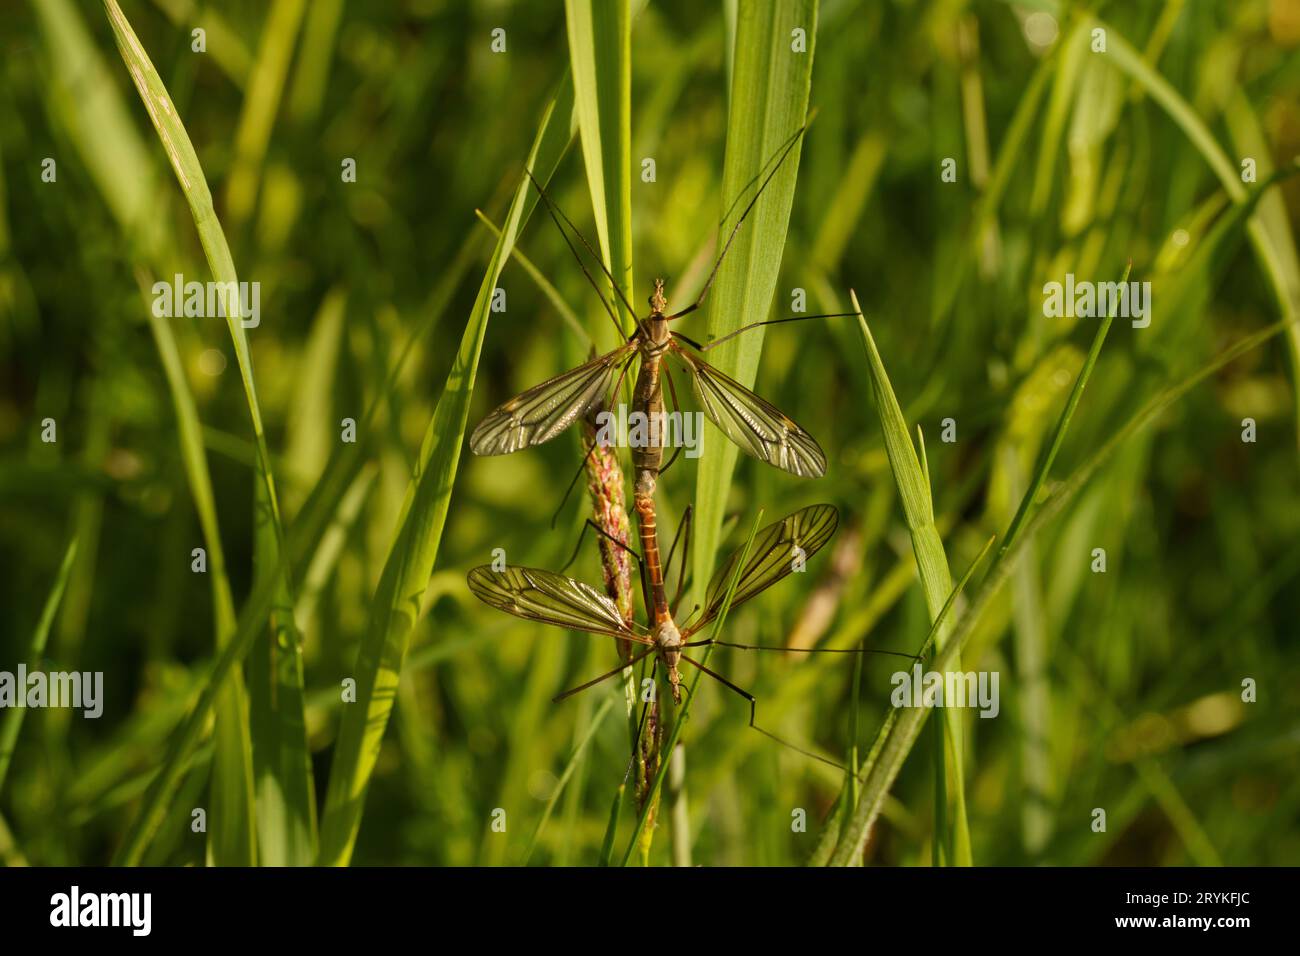 Tipula nubeculosa Family Tipulidae Genus Tipula Large cranefly Mosquito wild nature insect wallpaper, picture, photography Stock Photo